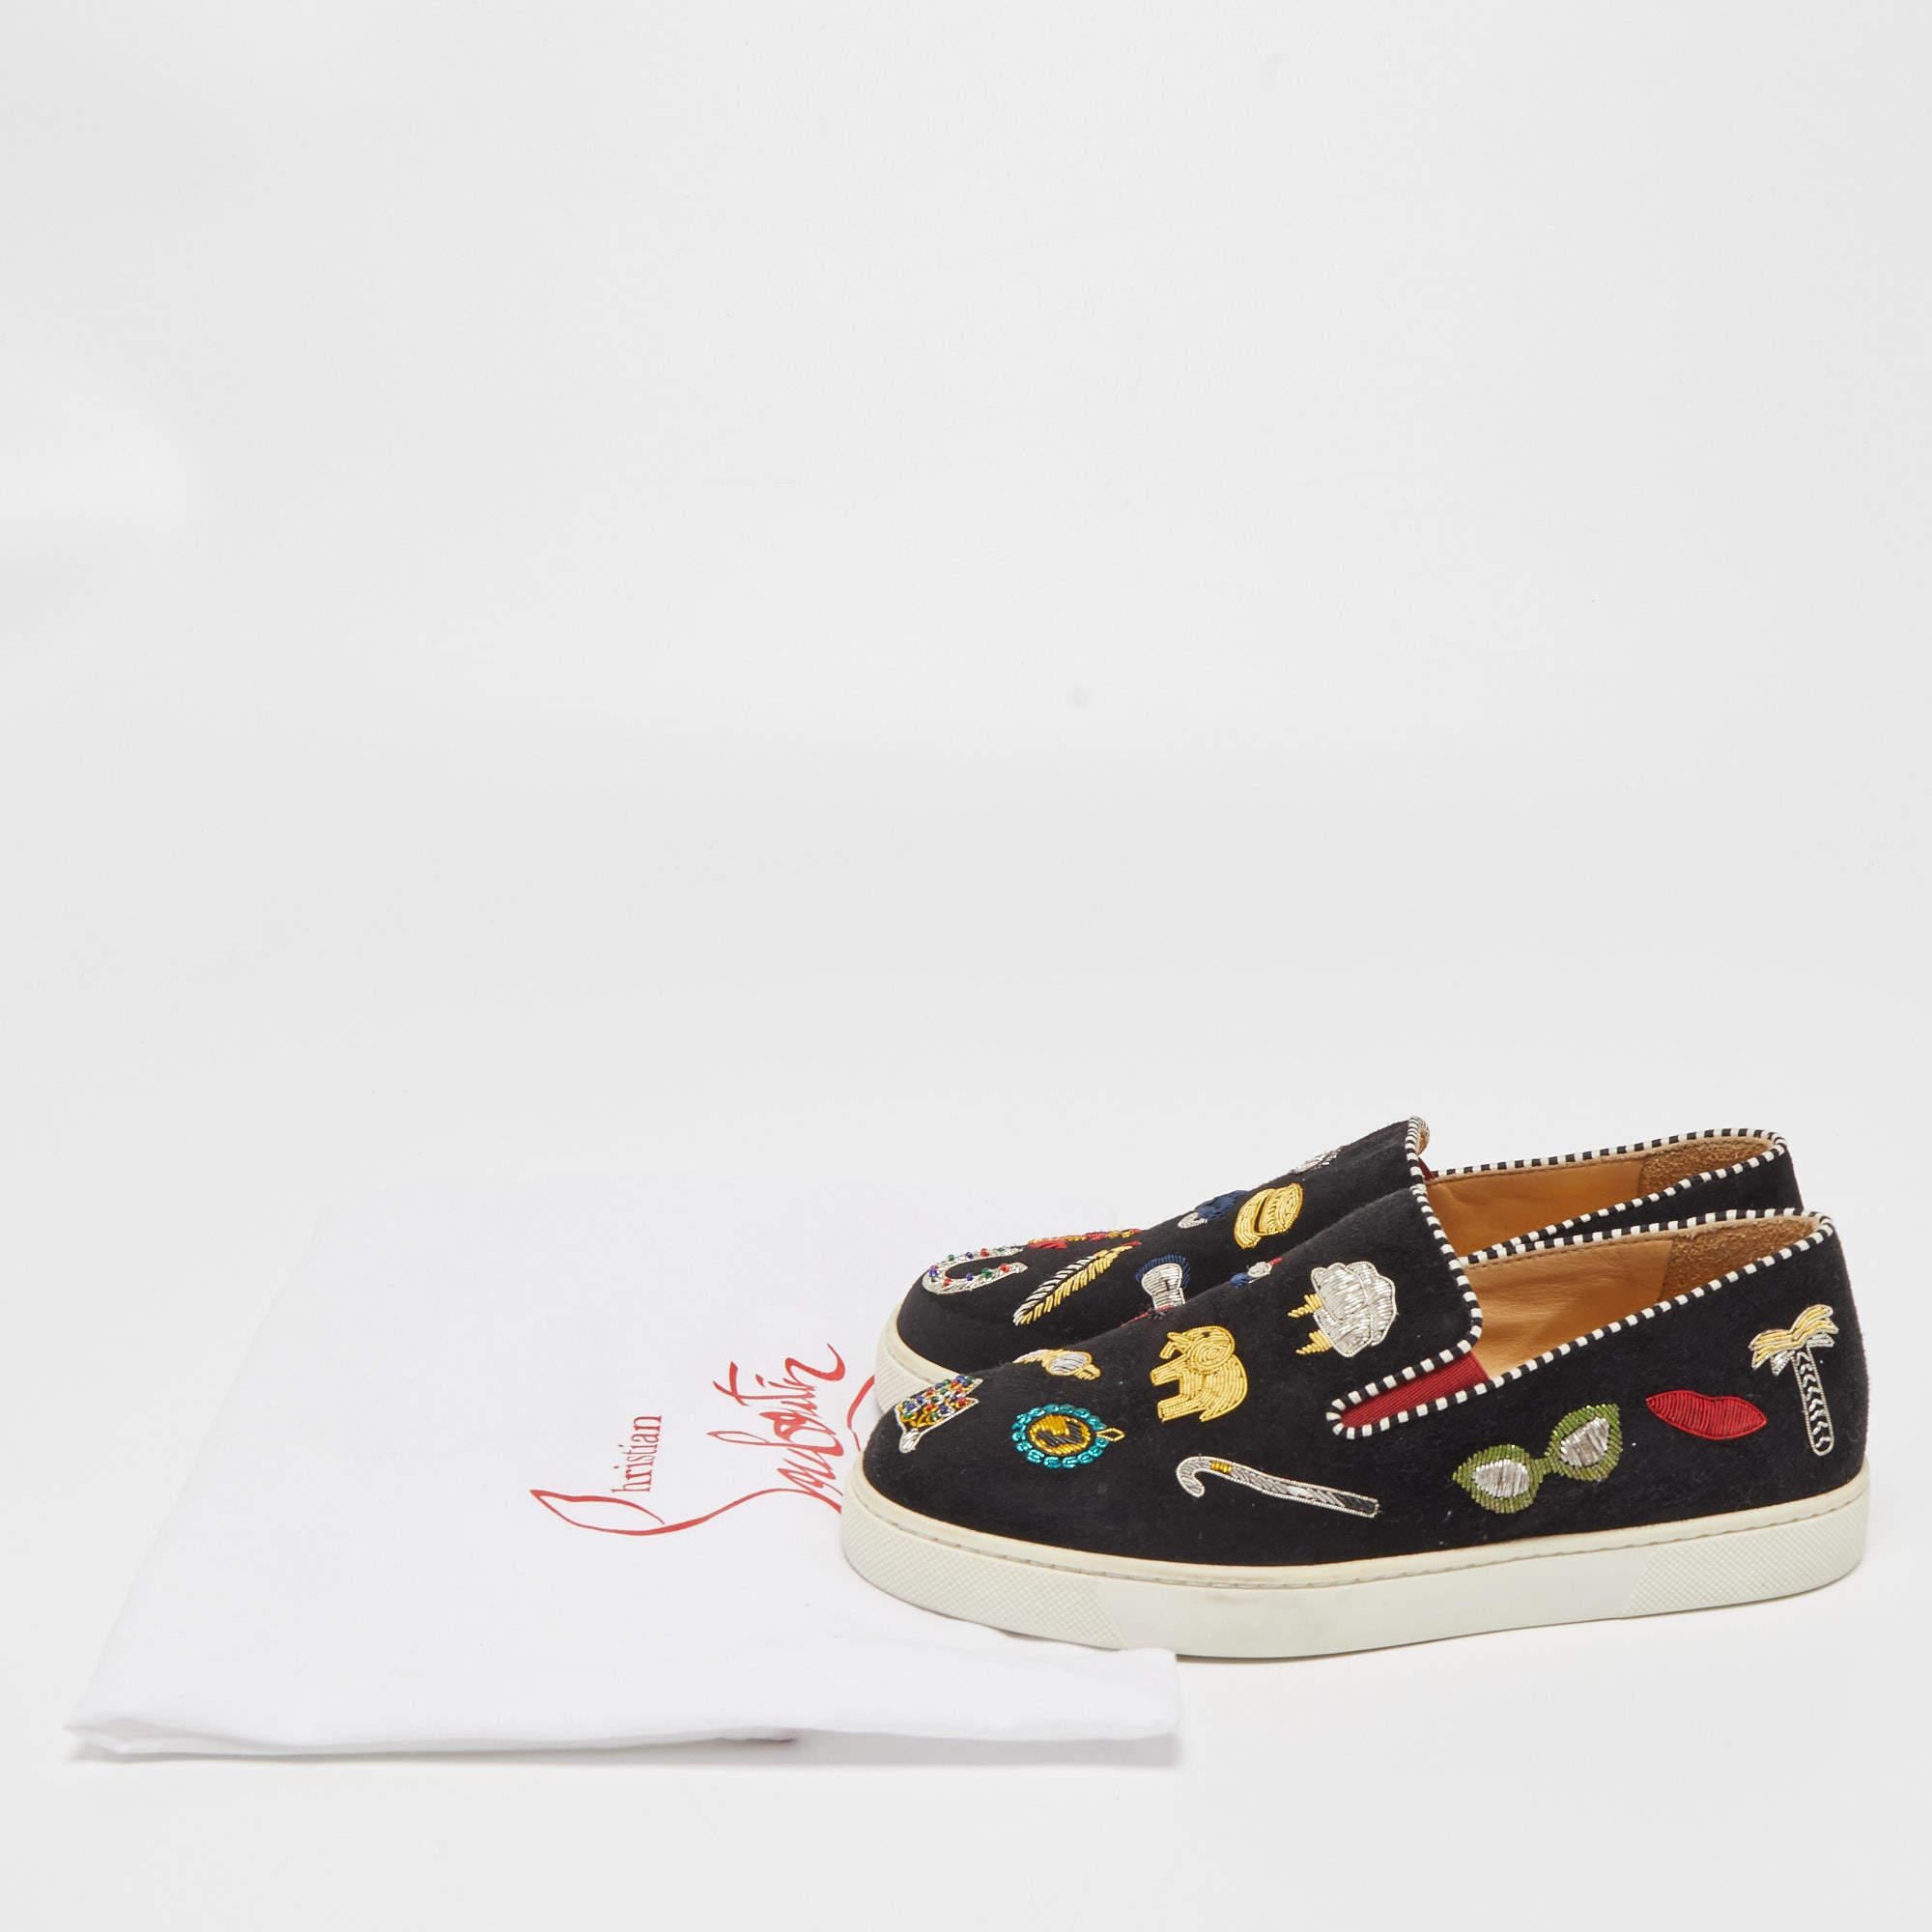 Christian Louboutin Black Suede Pik N Luck Sneakers Size 35 5